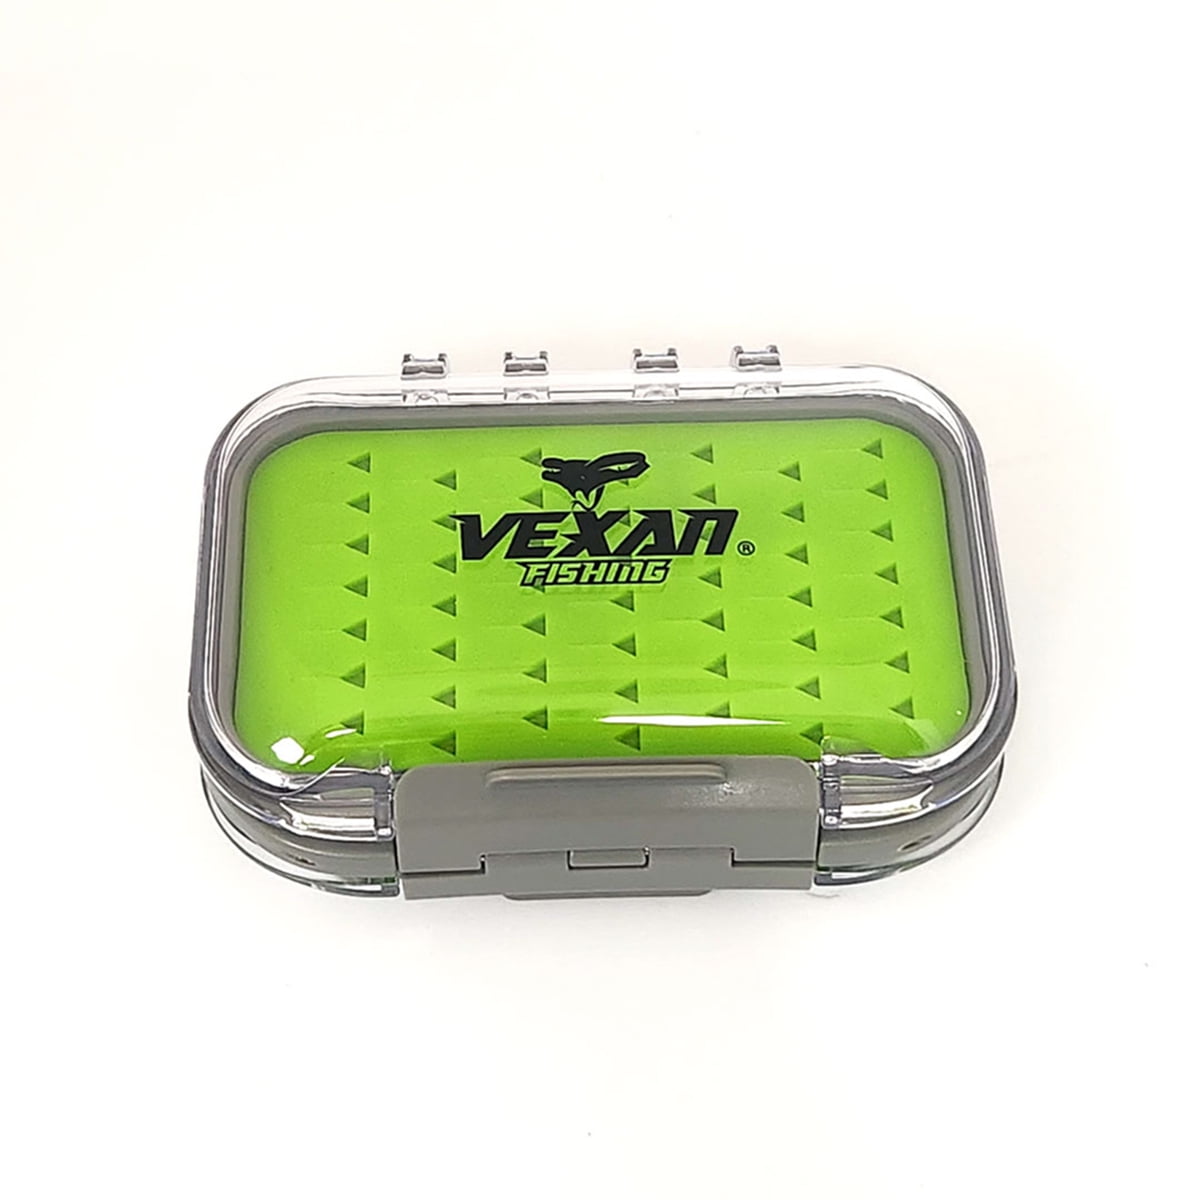 Vexan Double-Sided Mini Ice Fishing Jig Box with Silicone Insert